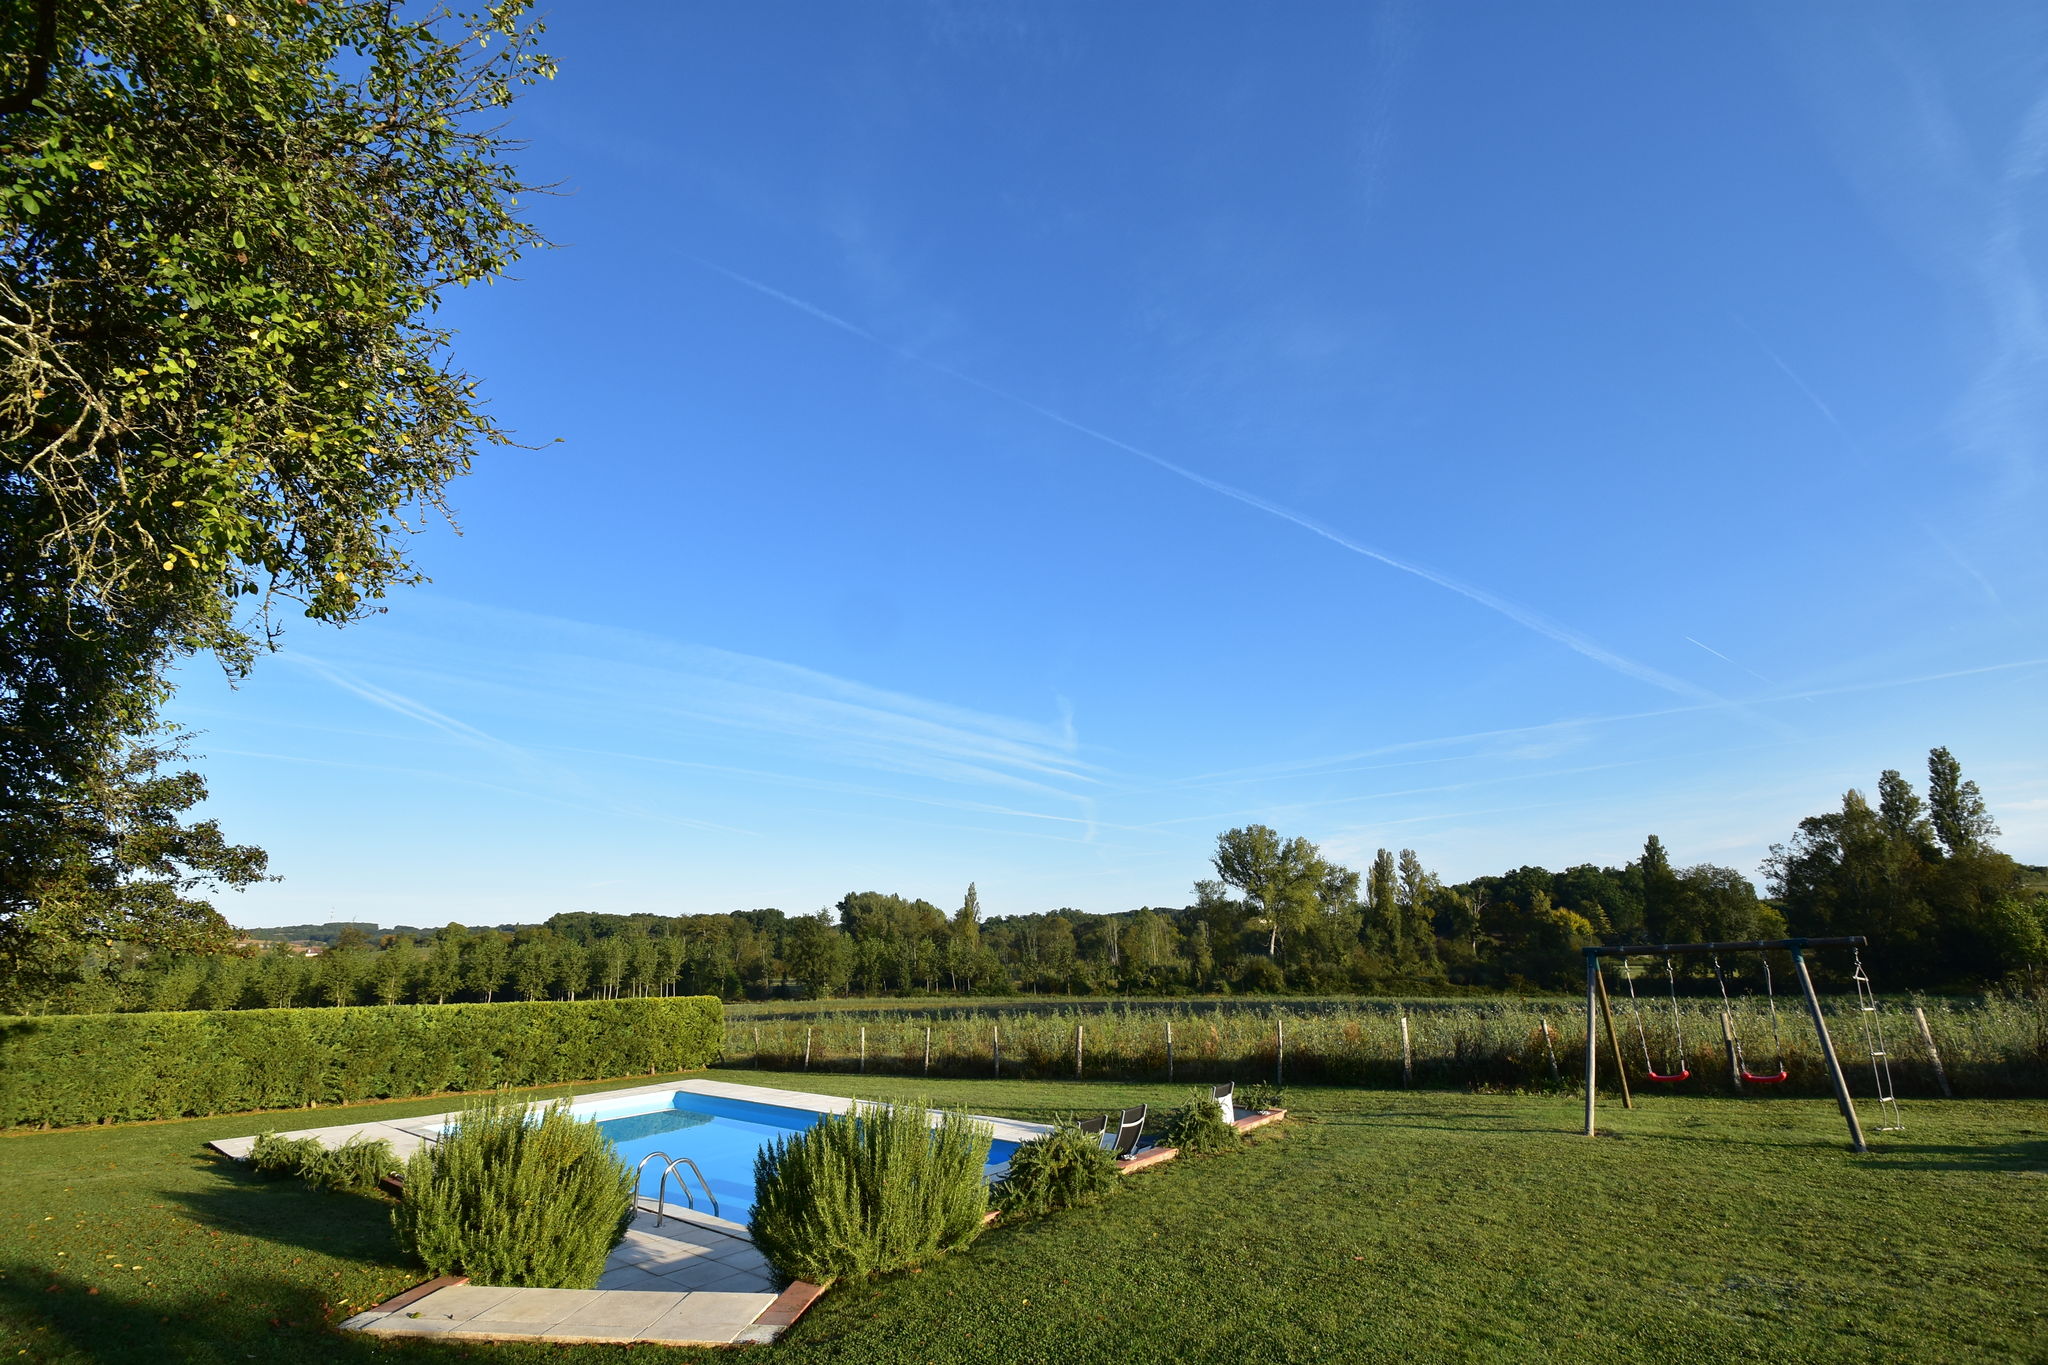 Beautiful holiday home with swimming pool, walking distance from the centre of Verteillac (1 km)